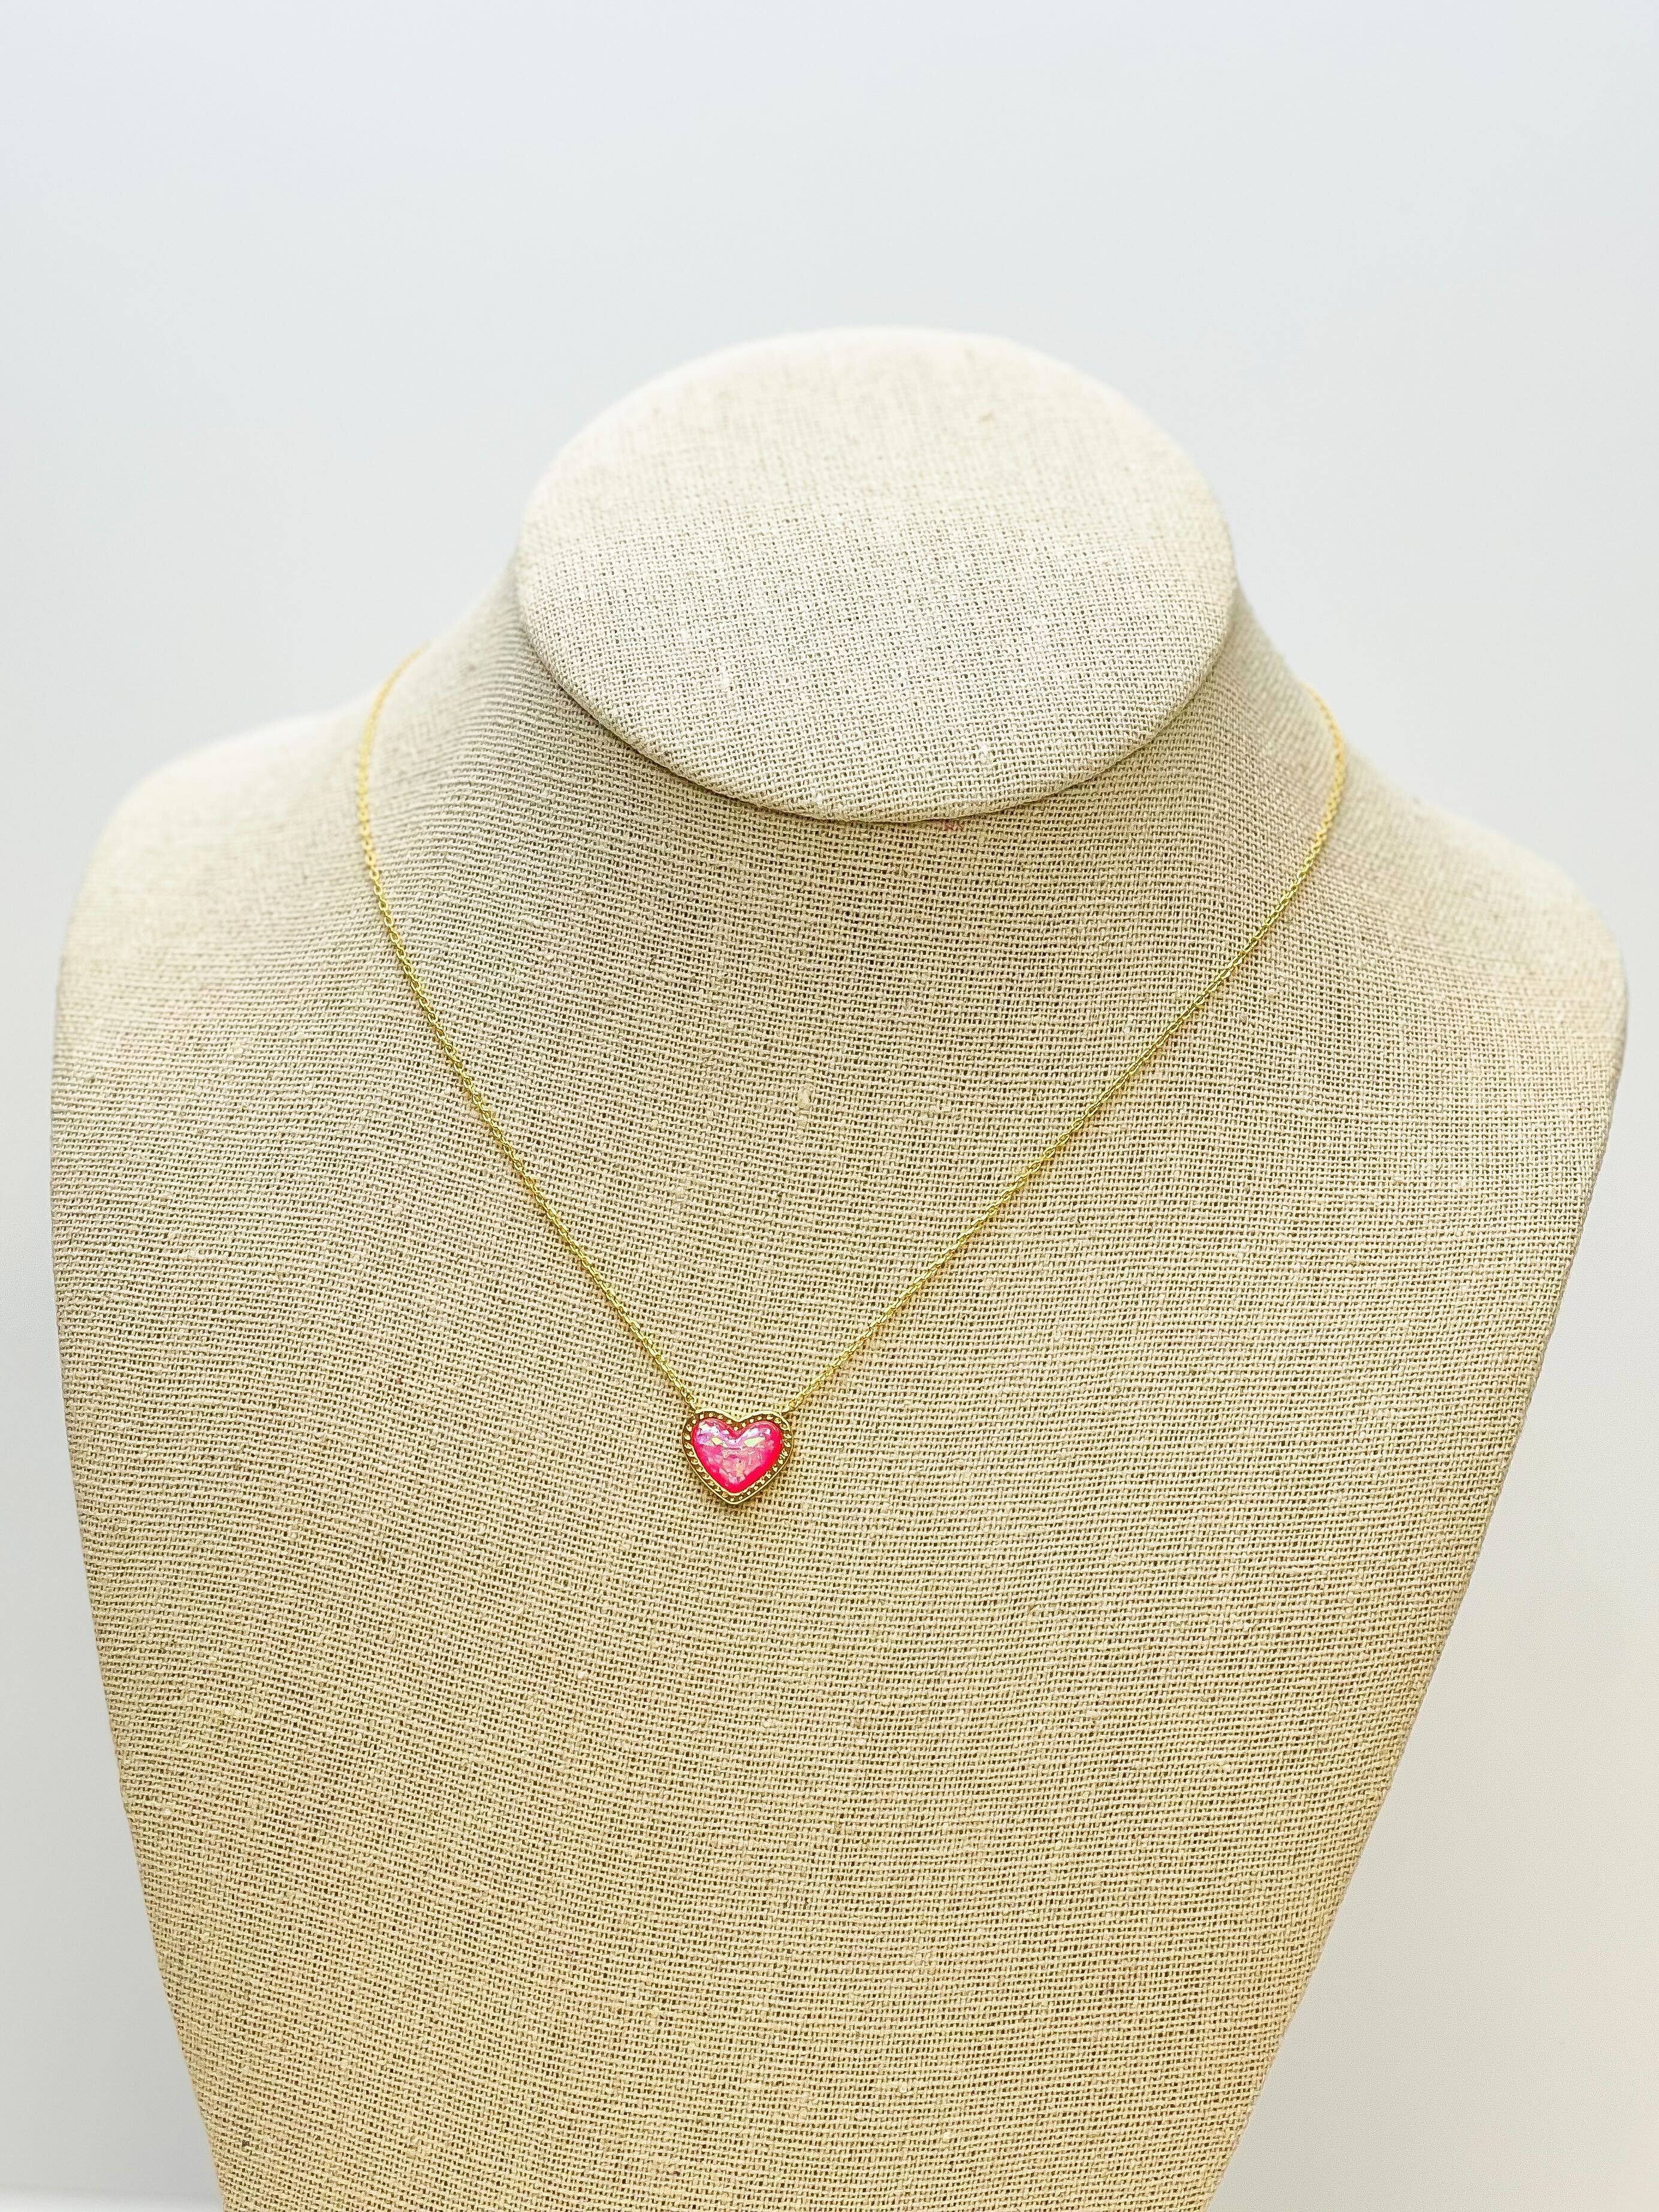 Bright Gold-Dipped Heart Charm Necklace - Pink